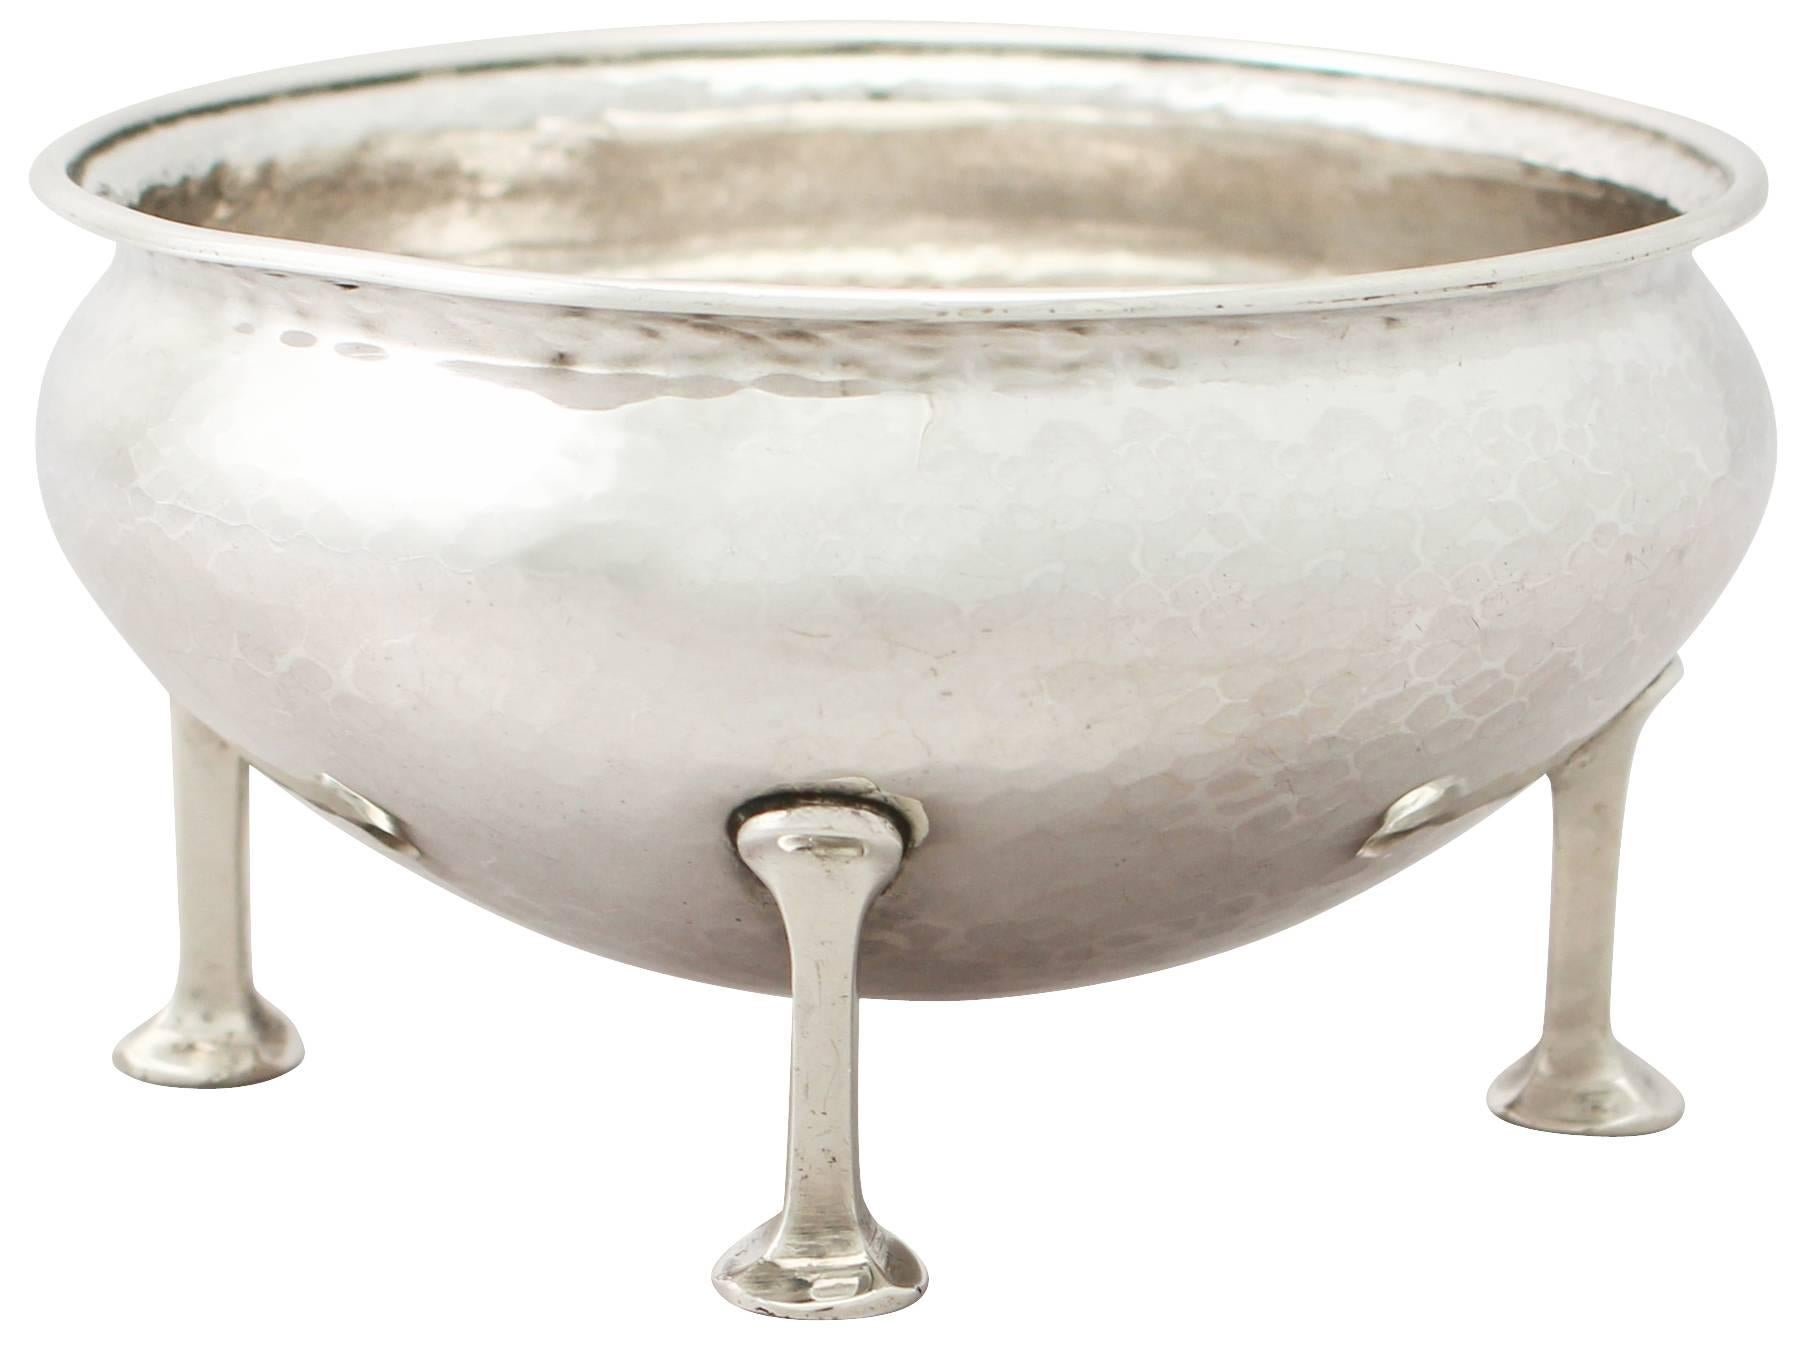 Early 20th Century Sterling Silver Sugar Bowl by A E Jones, Arts and Crafts Style, Antique George V